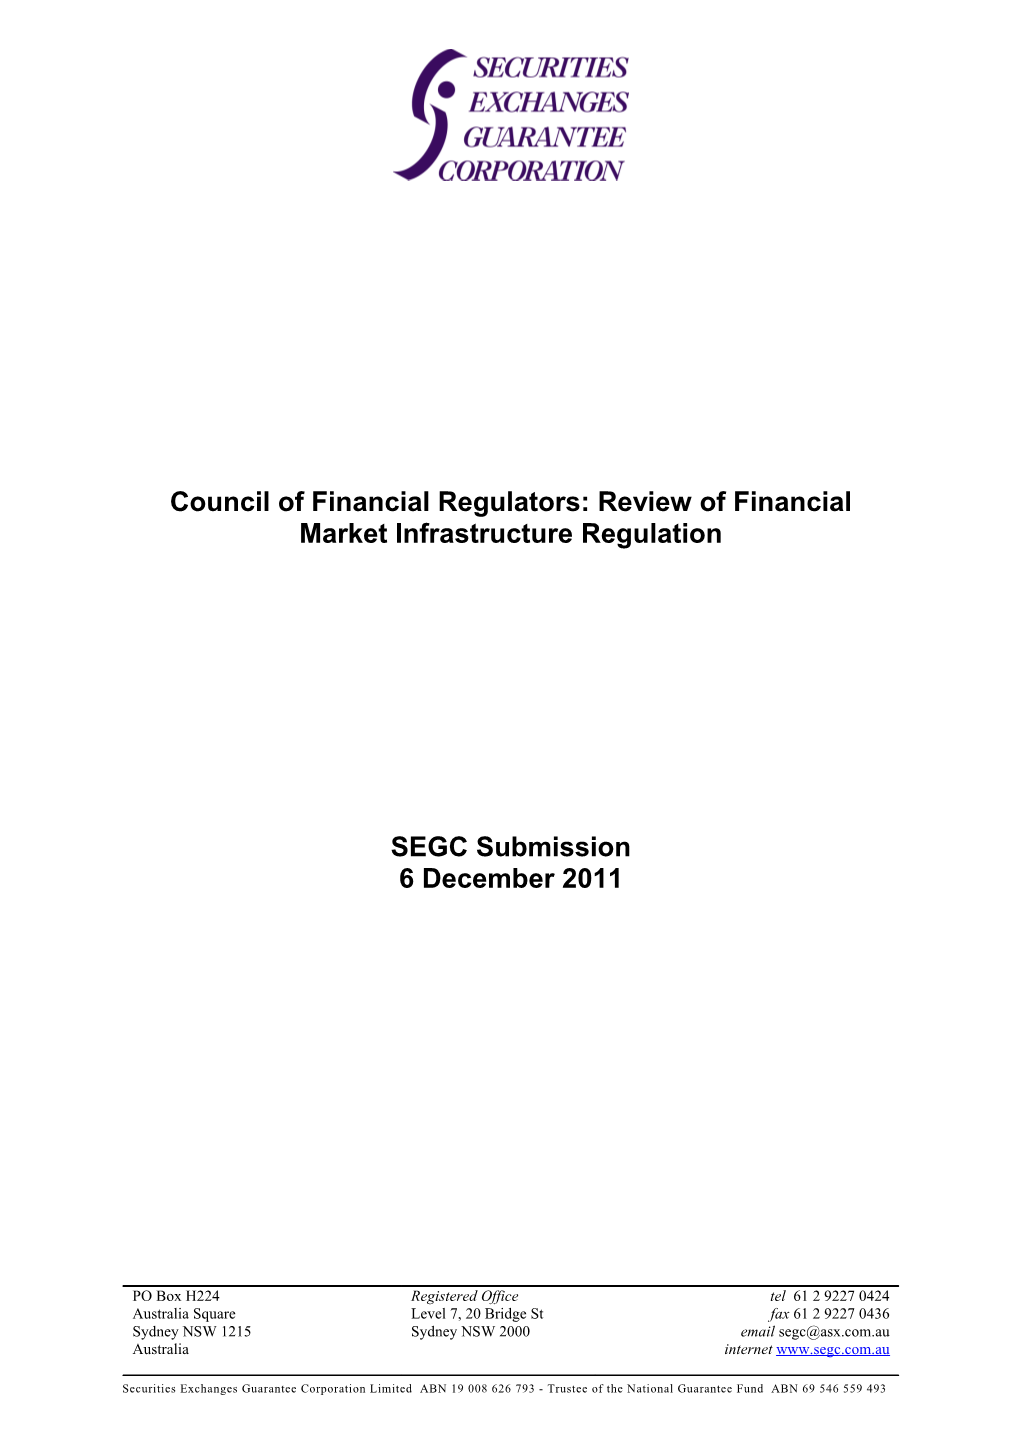 Submission: Consultation Paper - Council of Financial Regulators: Review of Financial Market